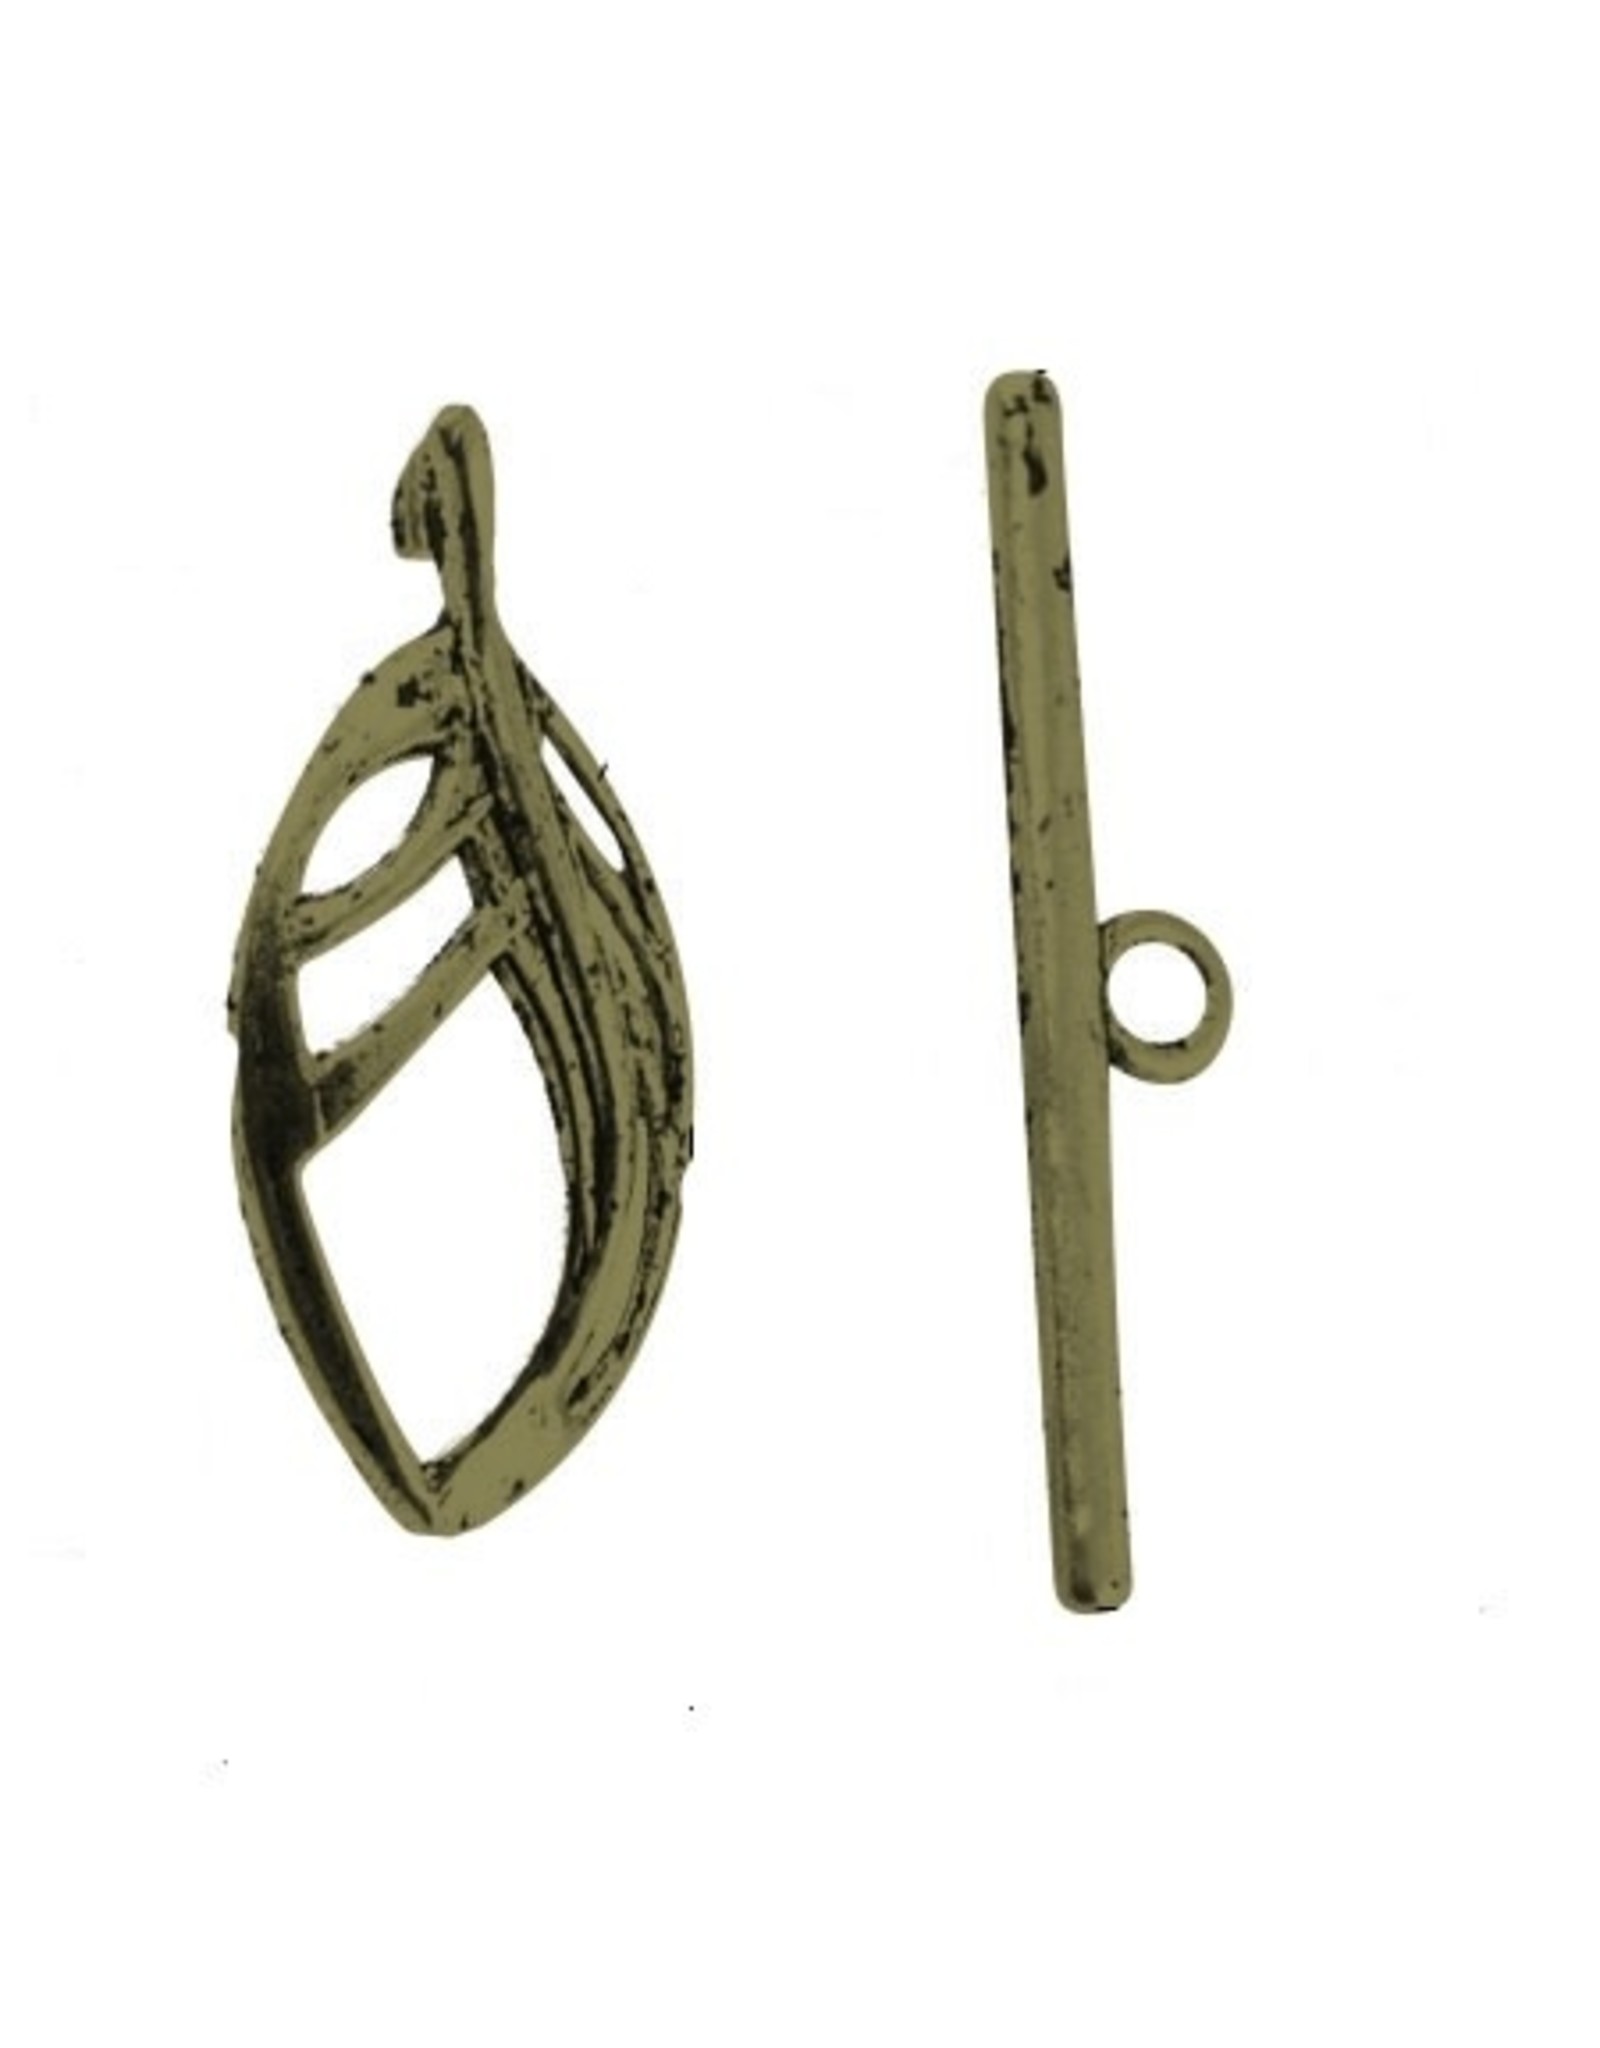 Toggle Clasp 25x11mm Leaf  Antique Brass  NF  x10